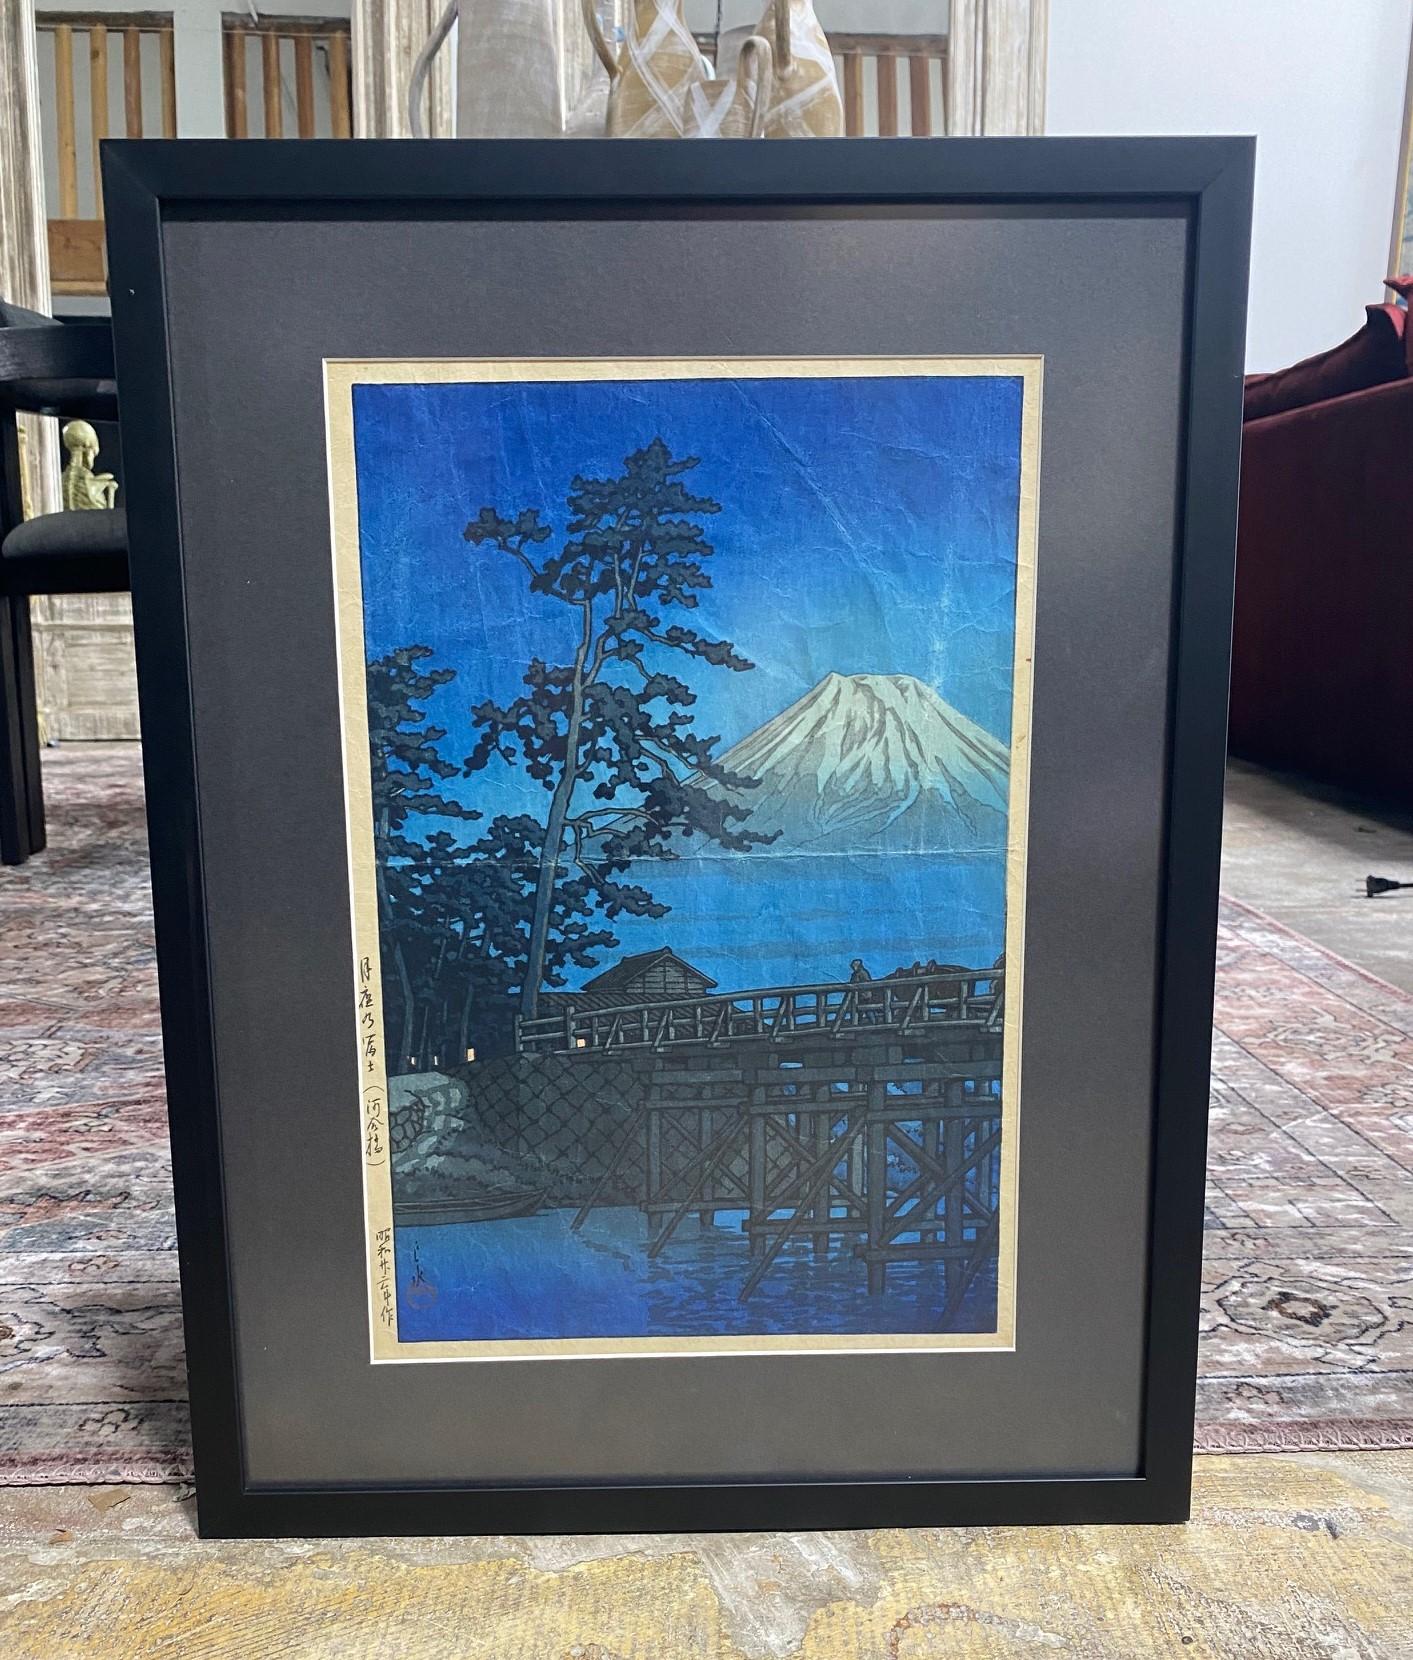 A beautiful and rich woodblock print by famed Japanese artist Kawase Hasui. This print titled 